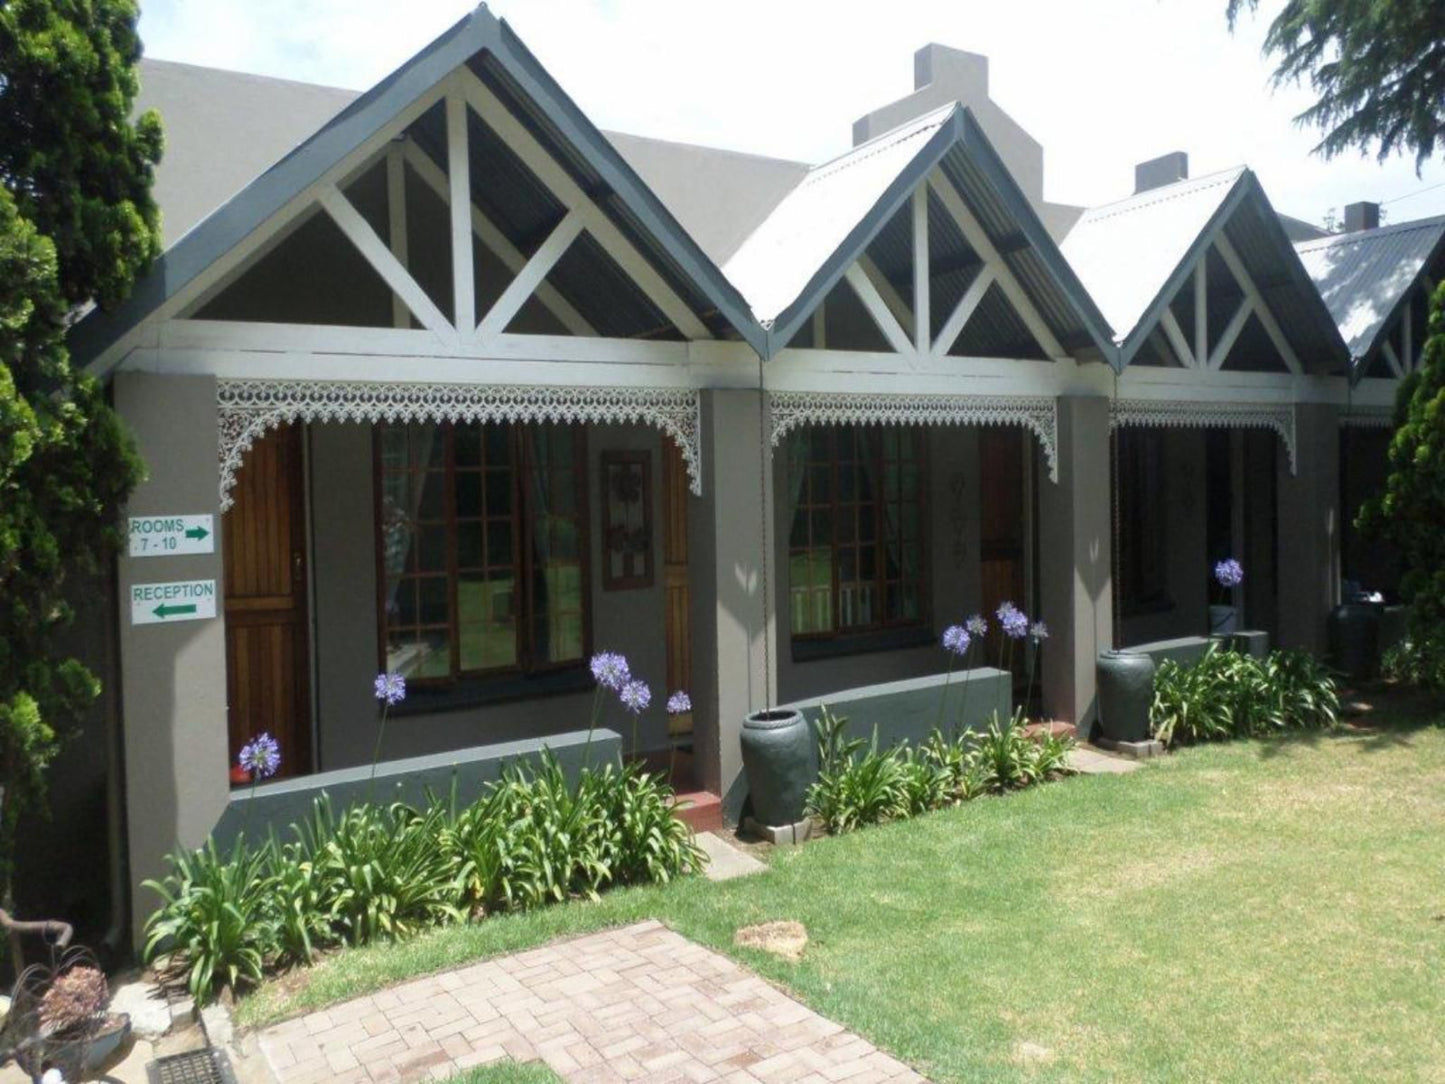 Bo Kamer Guesthouse Ermelo Mpumalanga South Africa House, Building, Architecture, Pavilion